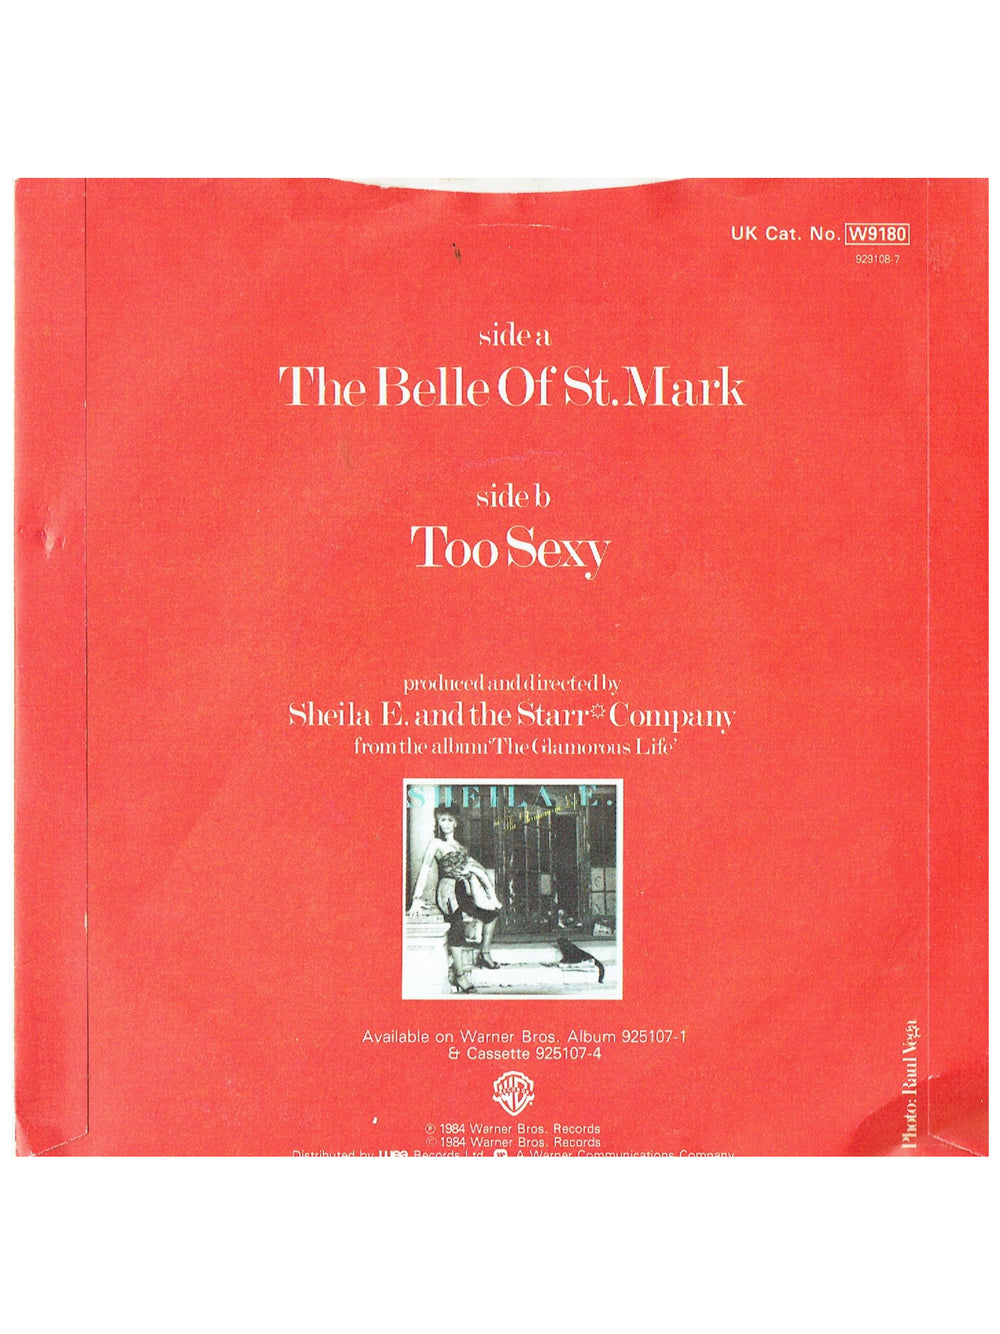 Prince – Sheila E The Belle Of St. Mark UK 7 Inch Vinyl 1984 Release Prince